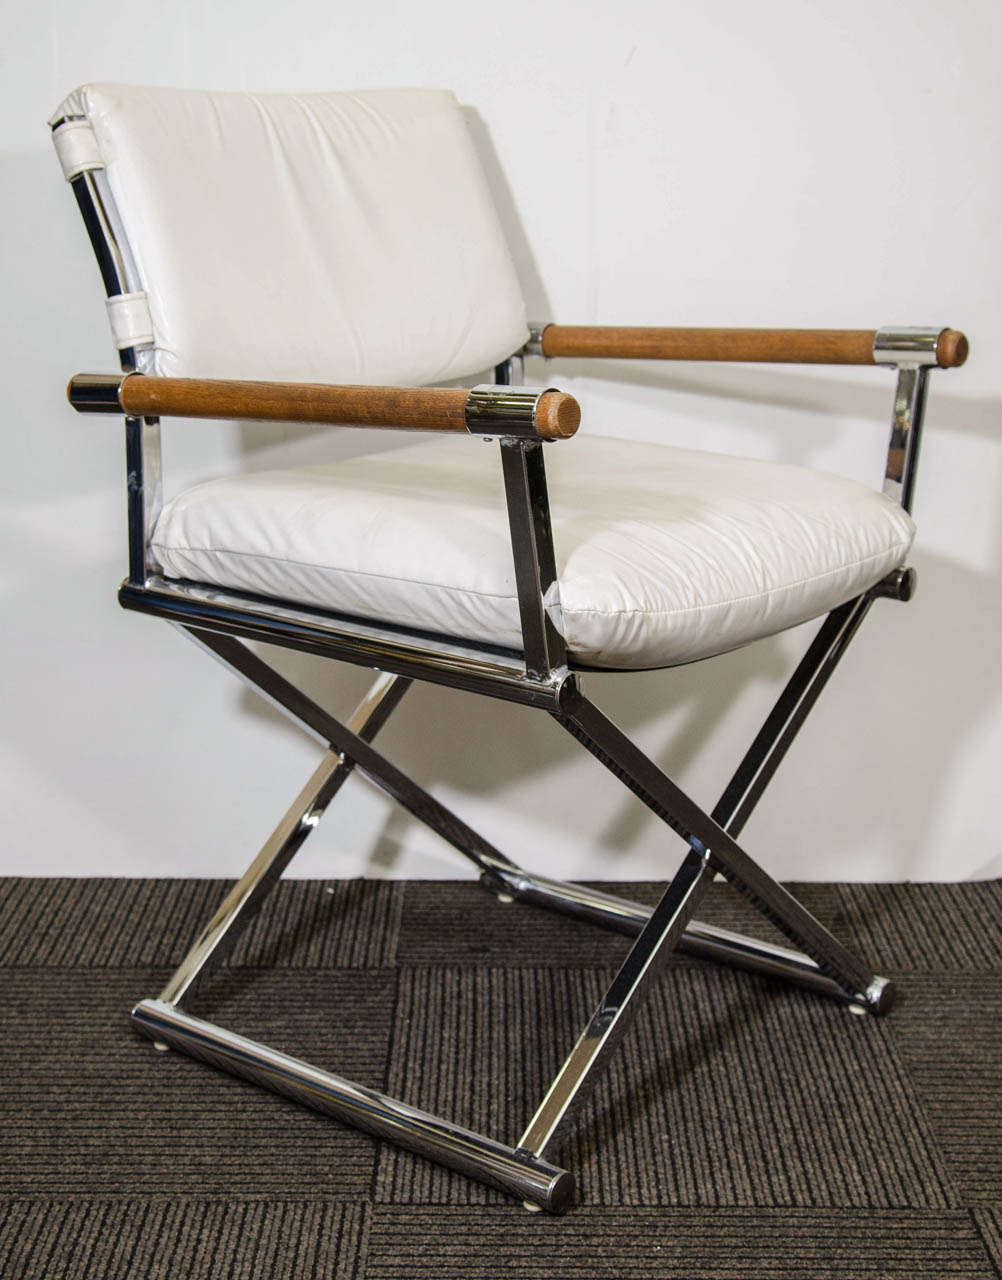 A pair of vintage director's chairs in white leather with a metal x-base frame and wooden arm rests. 

In good vintage condition with age appropriate wear. Some discoloration and scratches to the wood, small dents and scratches to metal, and a few